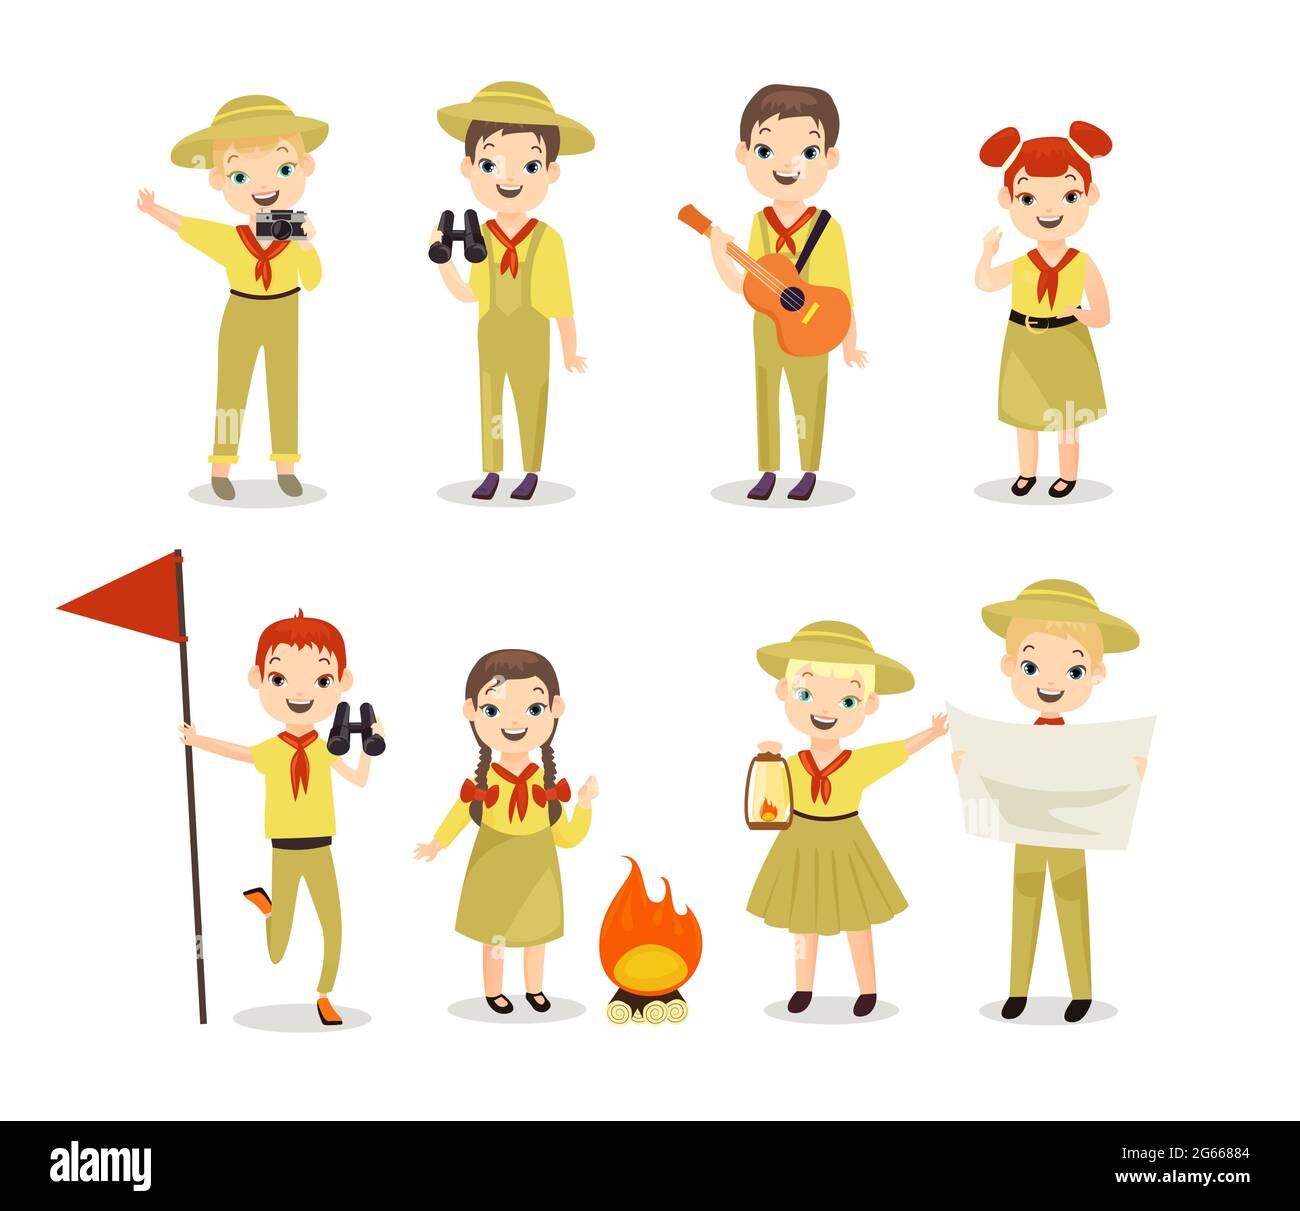 Scouts flat vector illustrations set. Children with hiking equipment, summer camp activities. Camping, outing, summertime leisure. Little campers Stock Vector